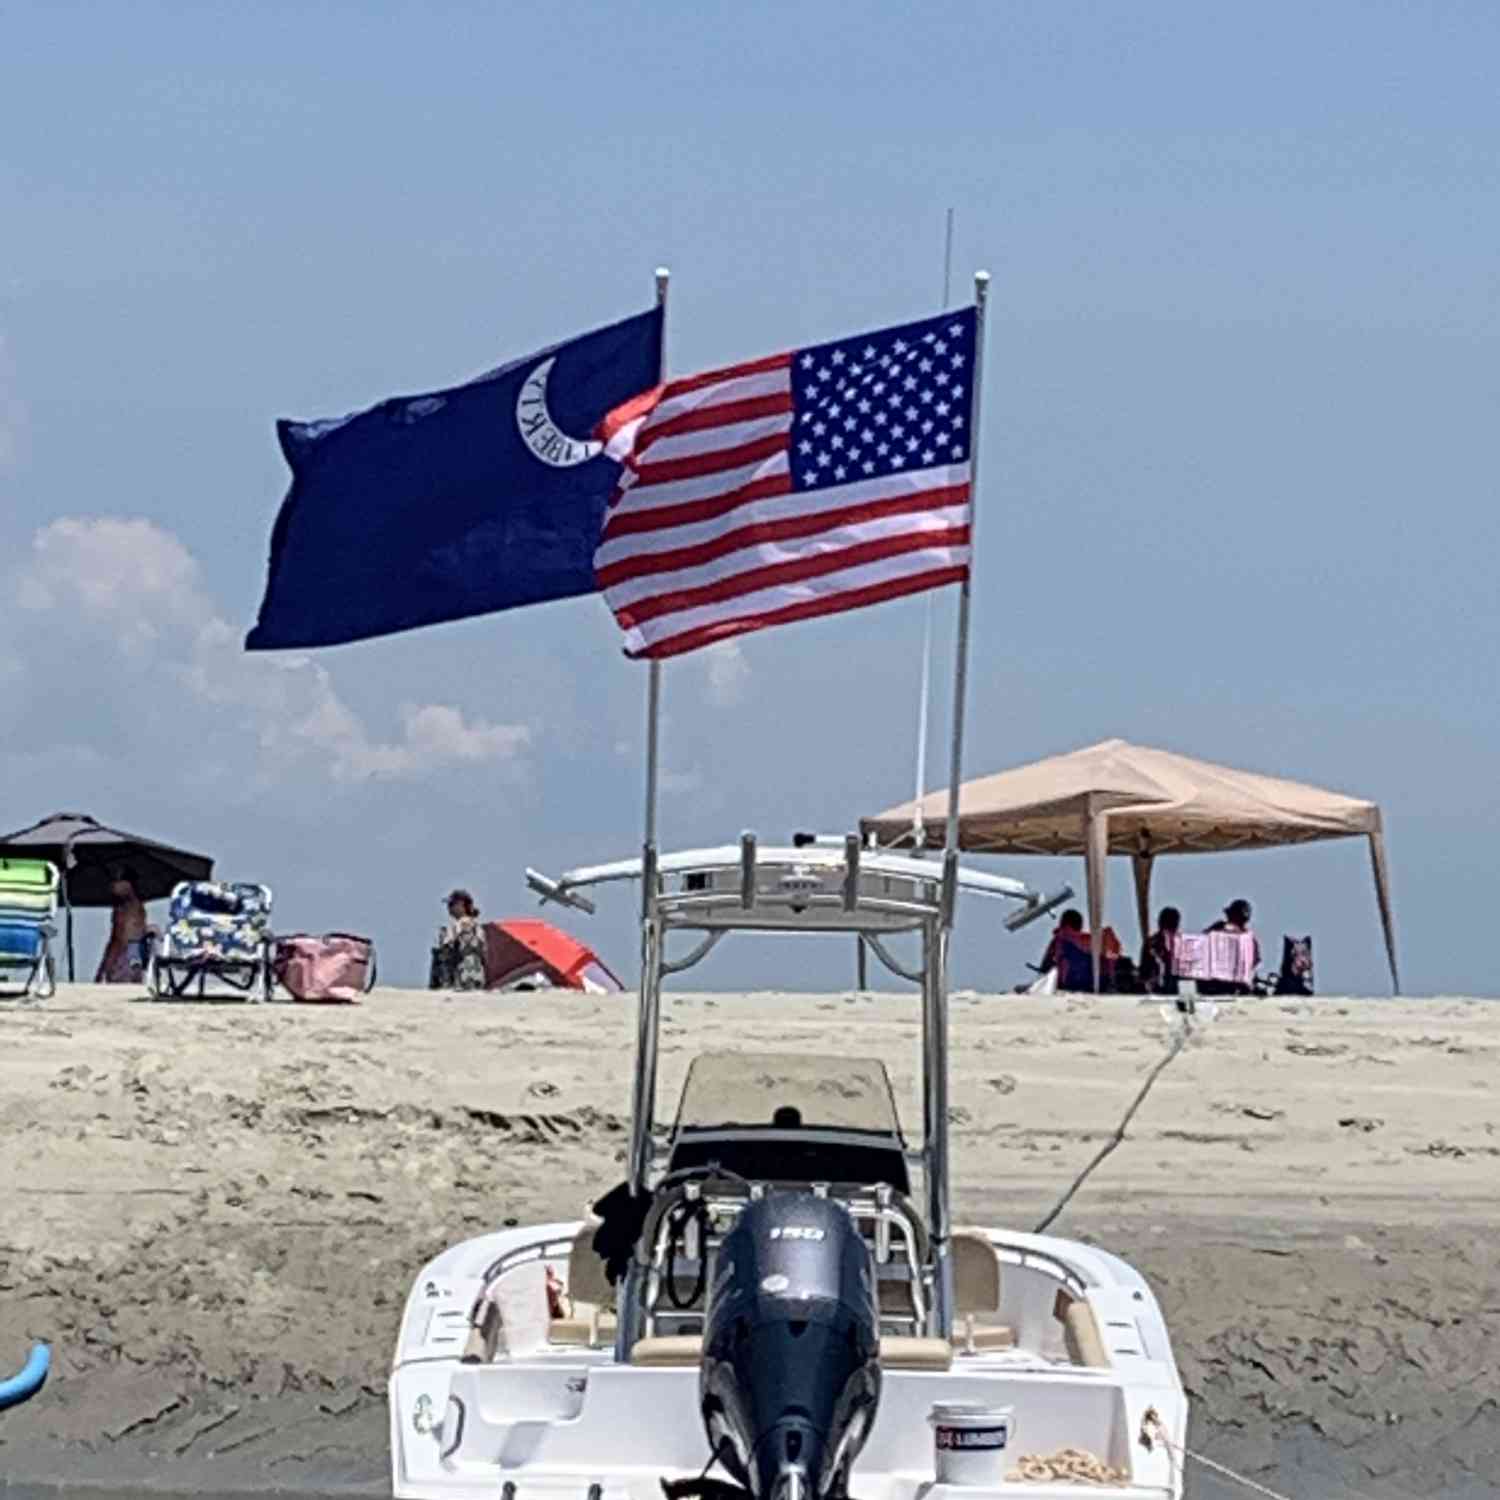 Title: Merica - On board their Sportsman Open 212 Center Console - Location: Sandy Point, Kiawah. Participating in the Photo Contest #SportsmanJuly2020